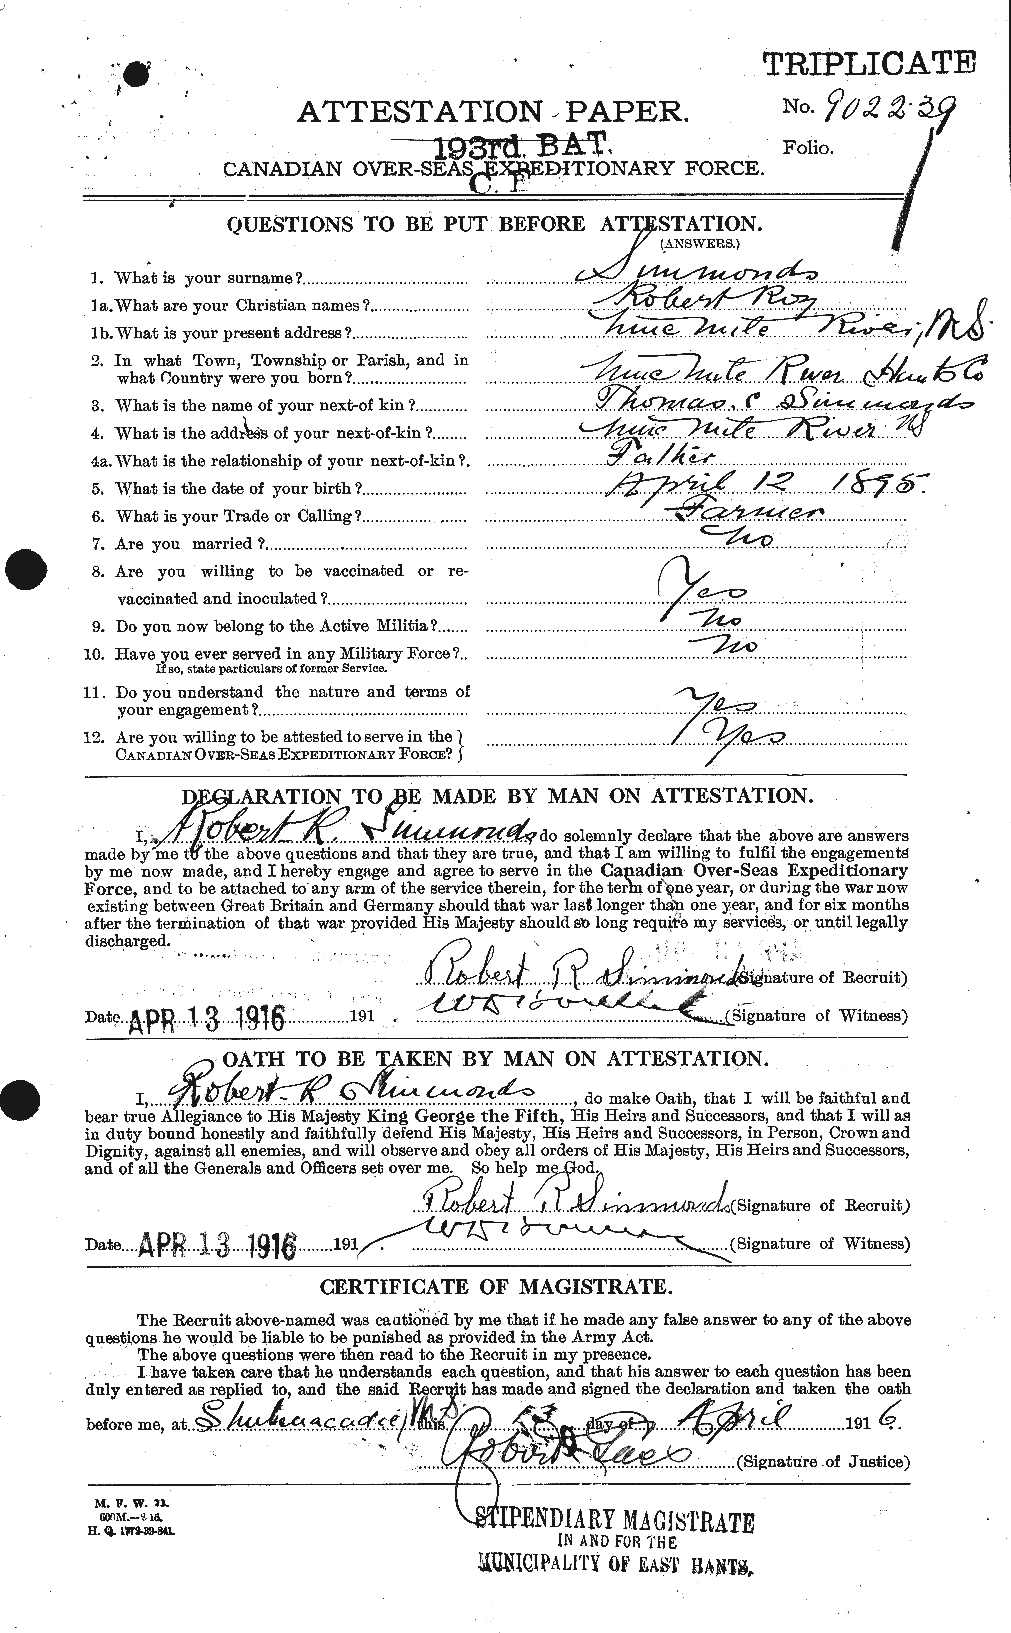 Personnel Records of the First World War - CEF 099419a